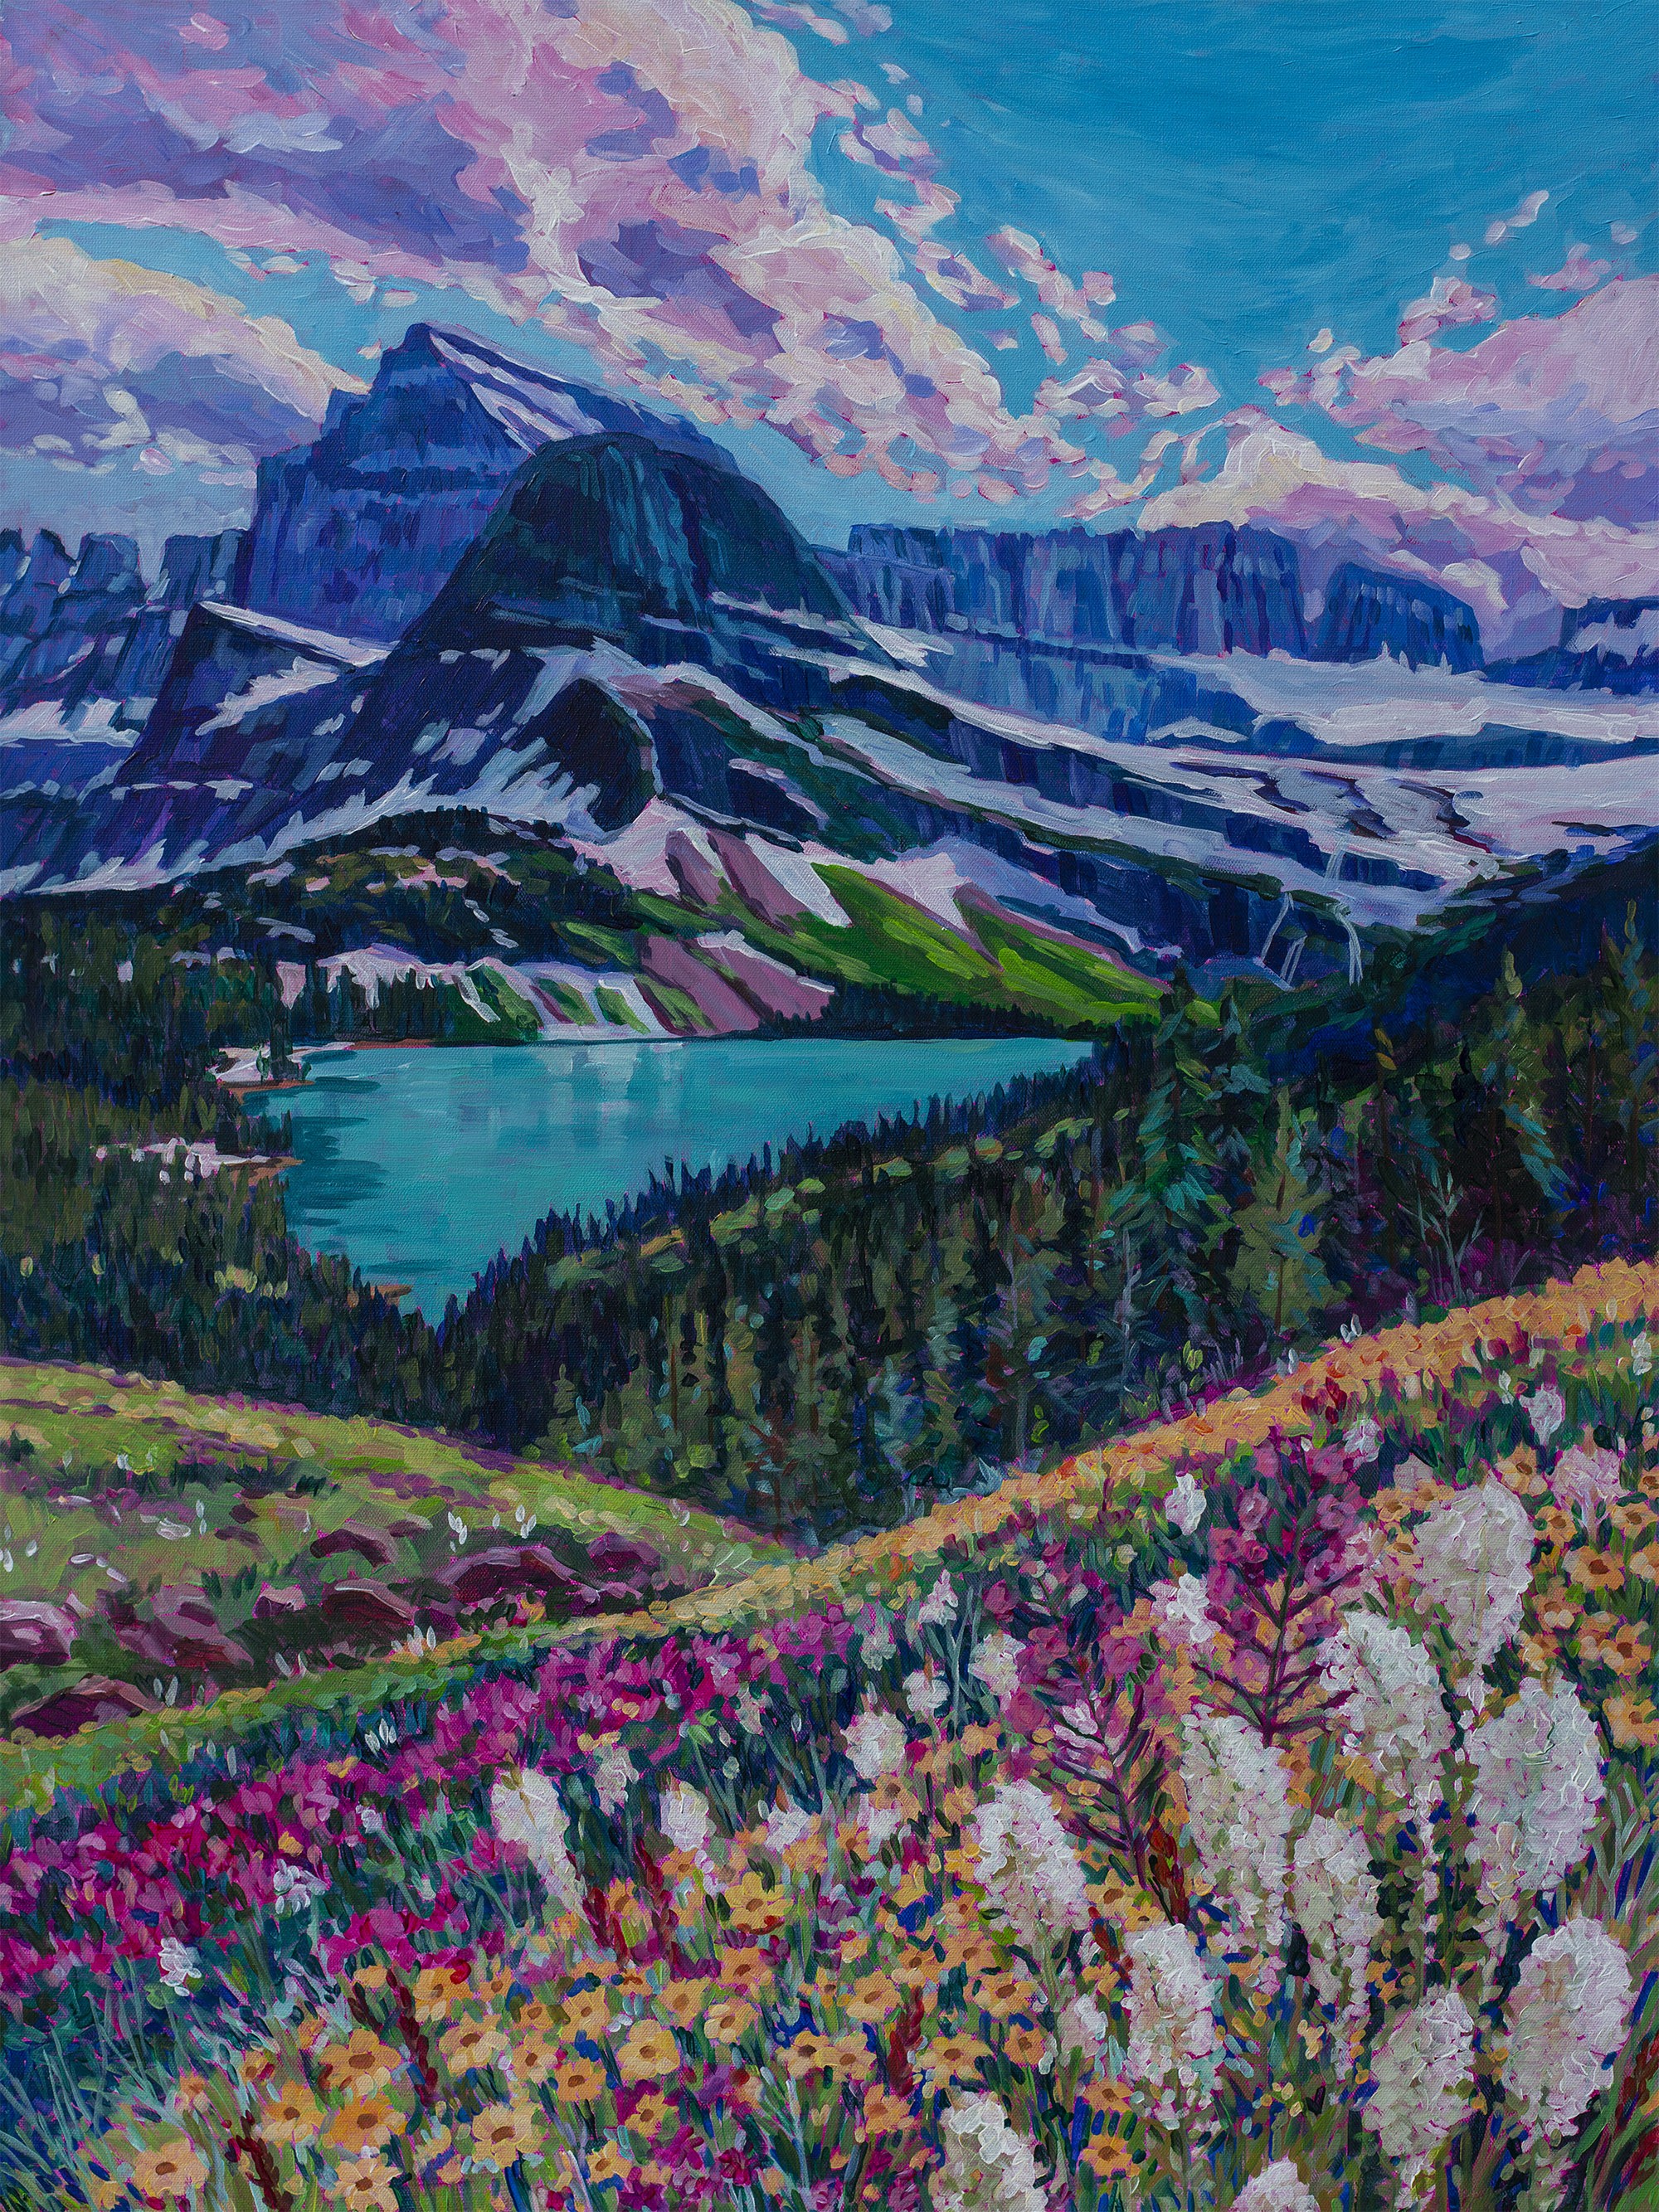 Flowers in the foreground, background is trees, alpine lake and mountains with some snow on them, Glacier National Park, Montana